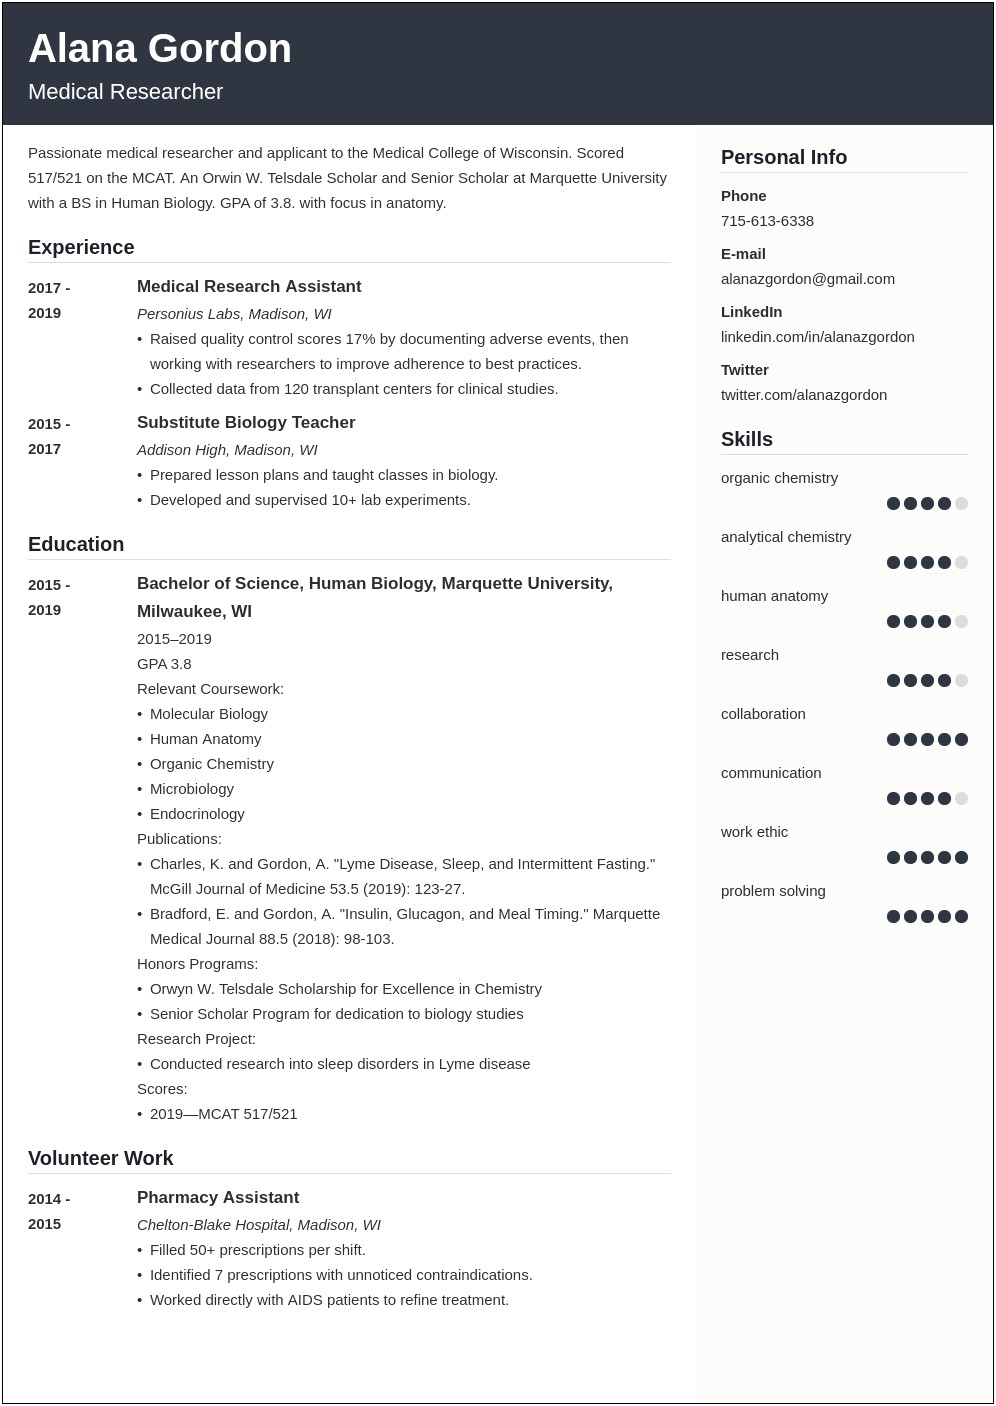 Resume Objective For Med School Applicant